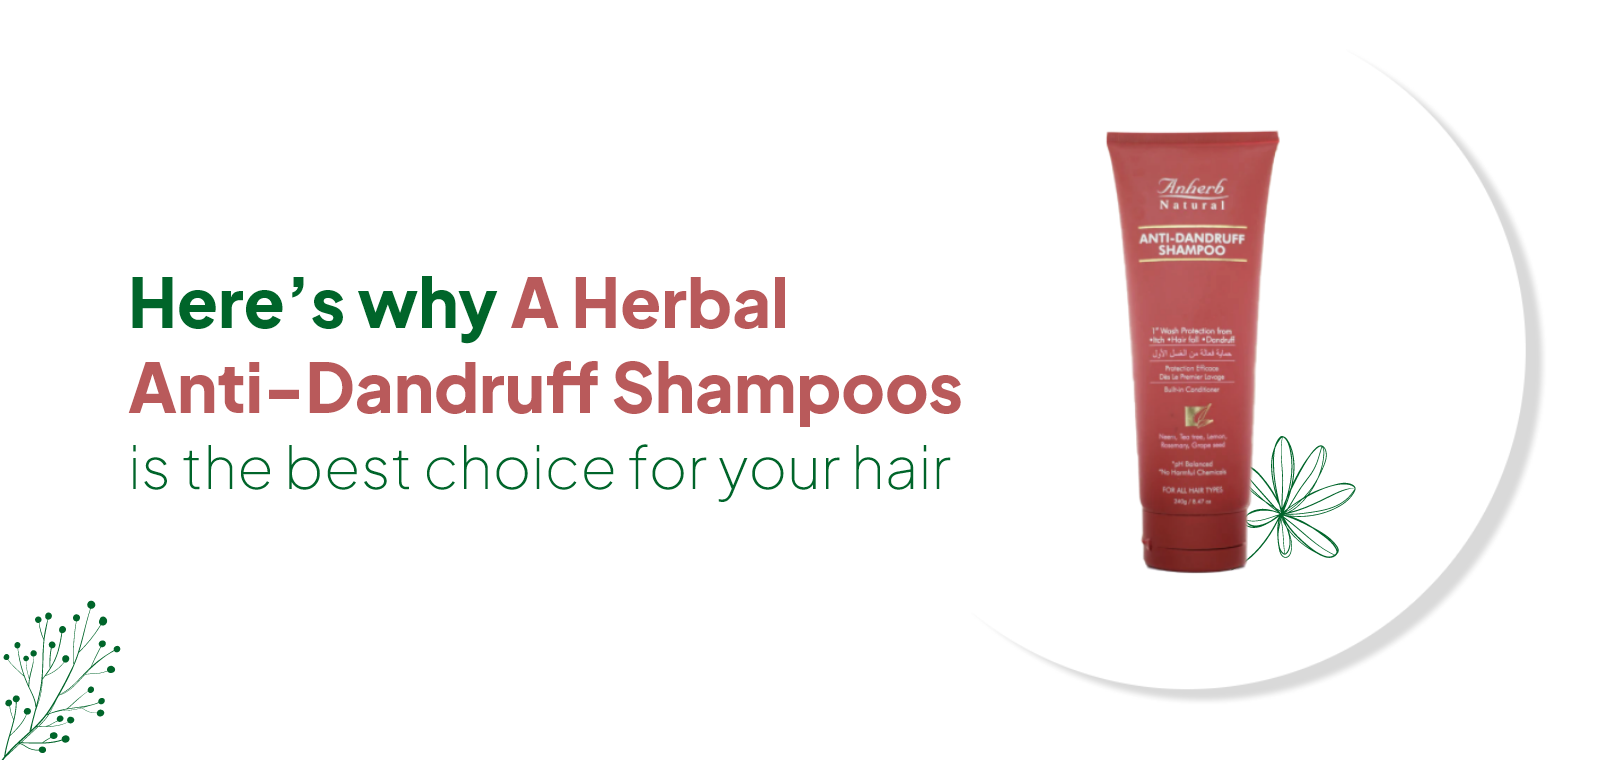 Here’s why a Herbal Anti-Dandruff Shampoo is the best choice for your hair